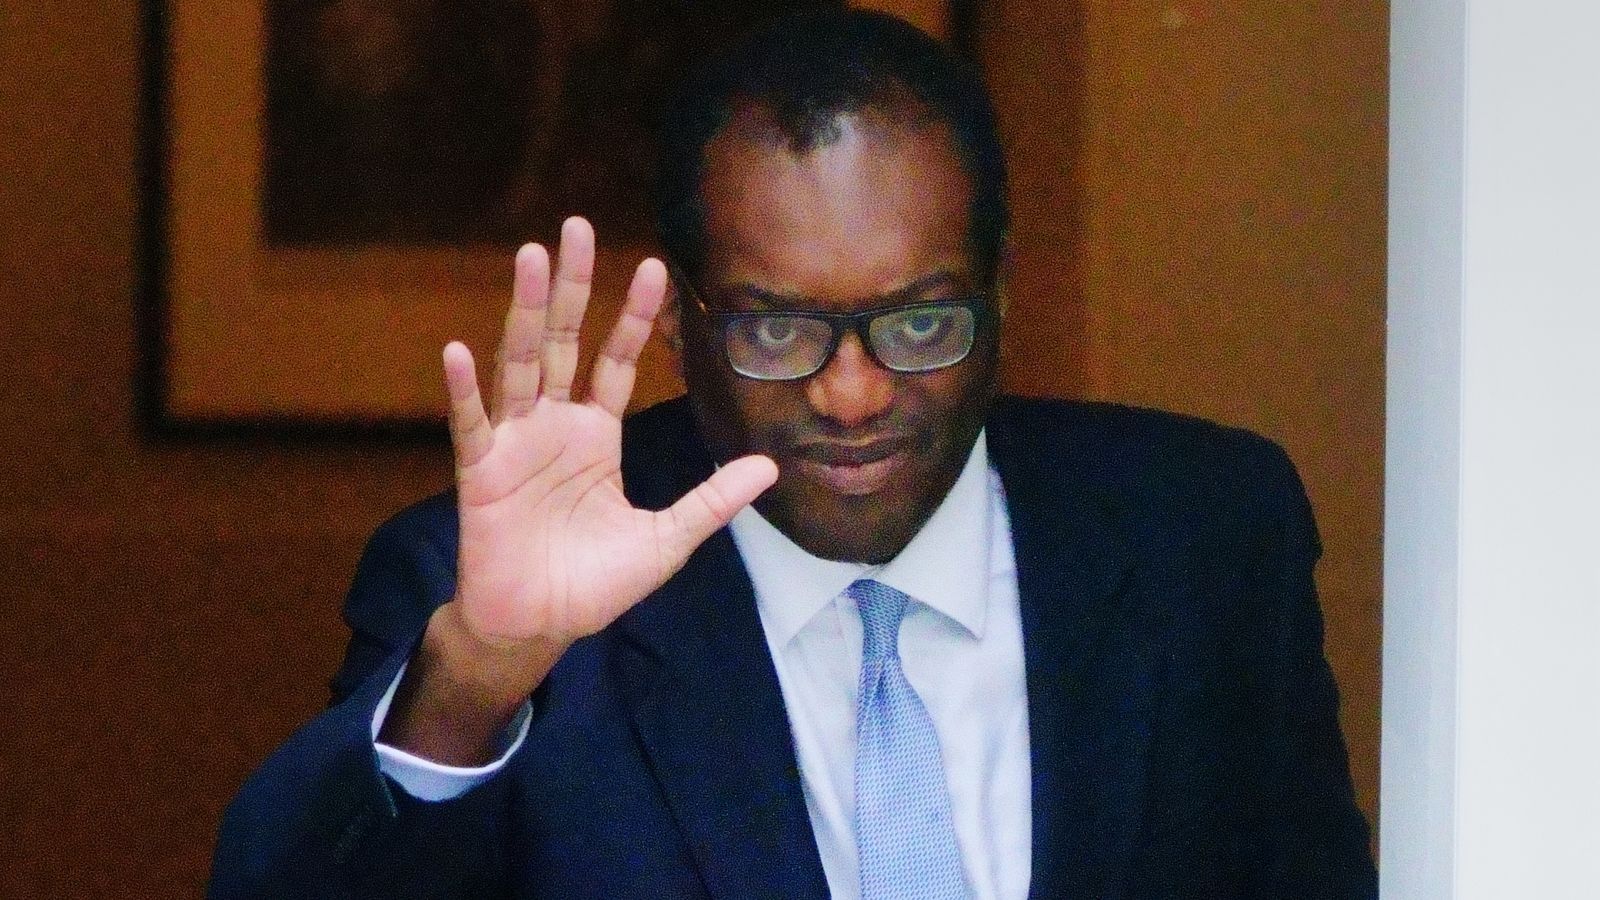 After Kwasi Kwarteng's disastrous mini-budget, there is no magic cure